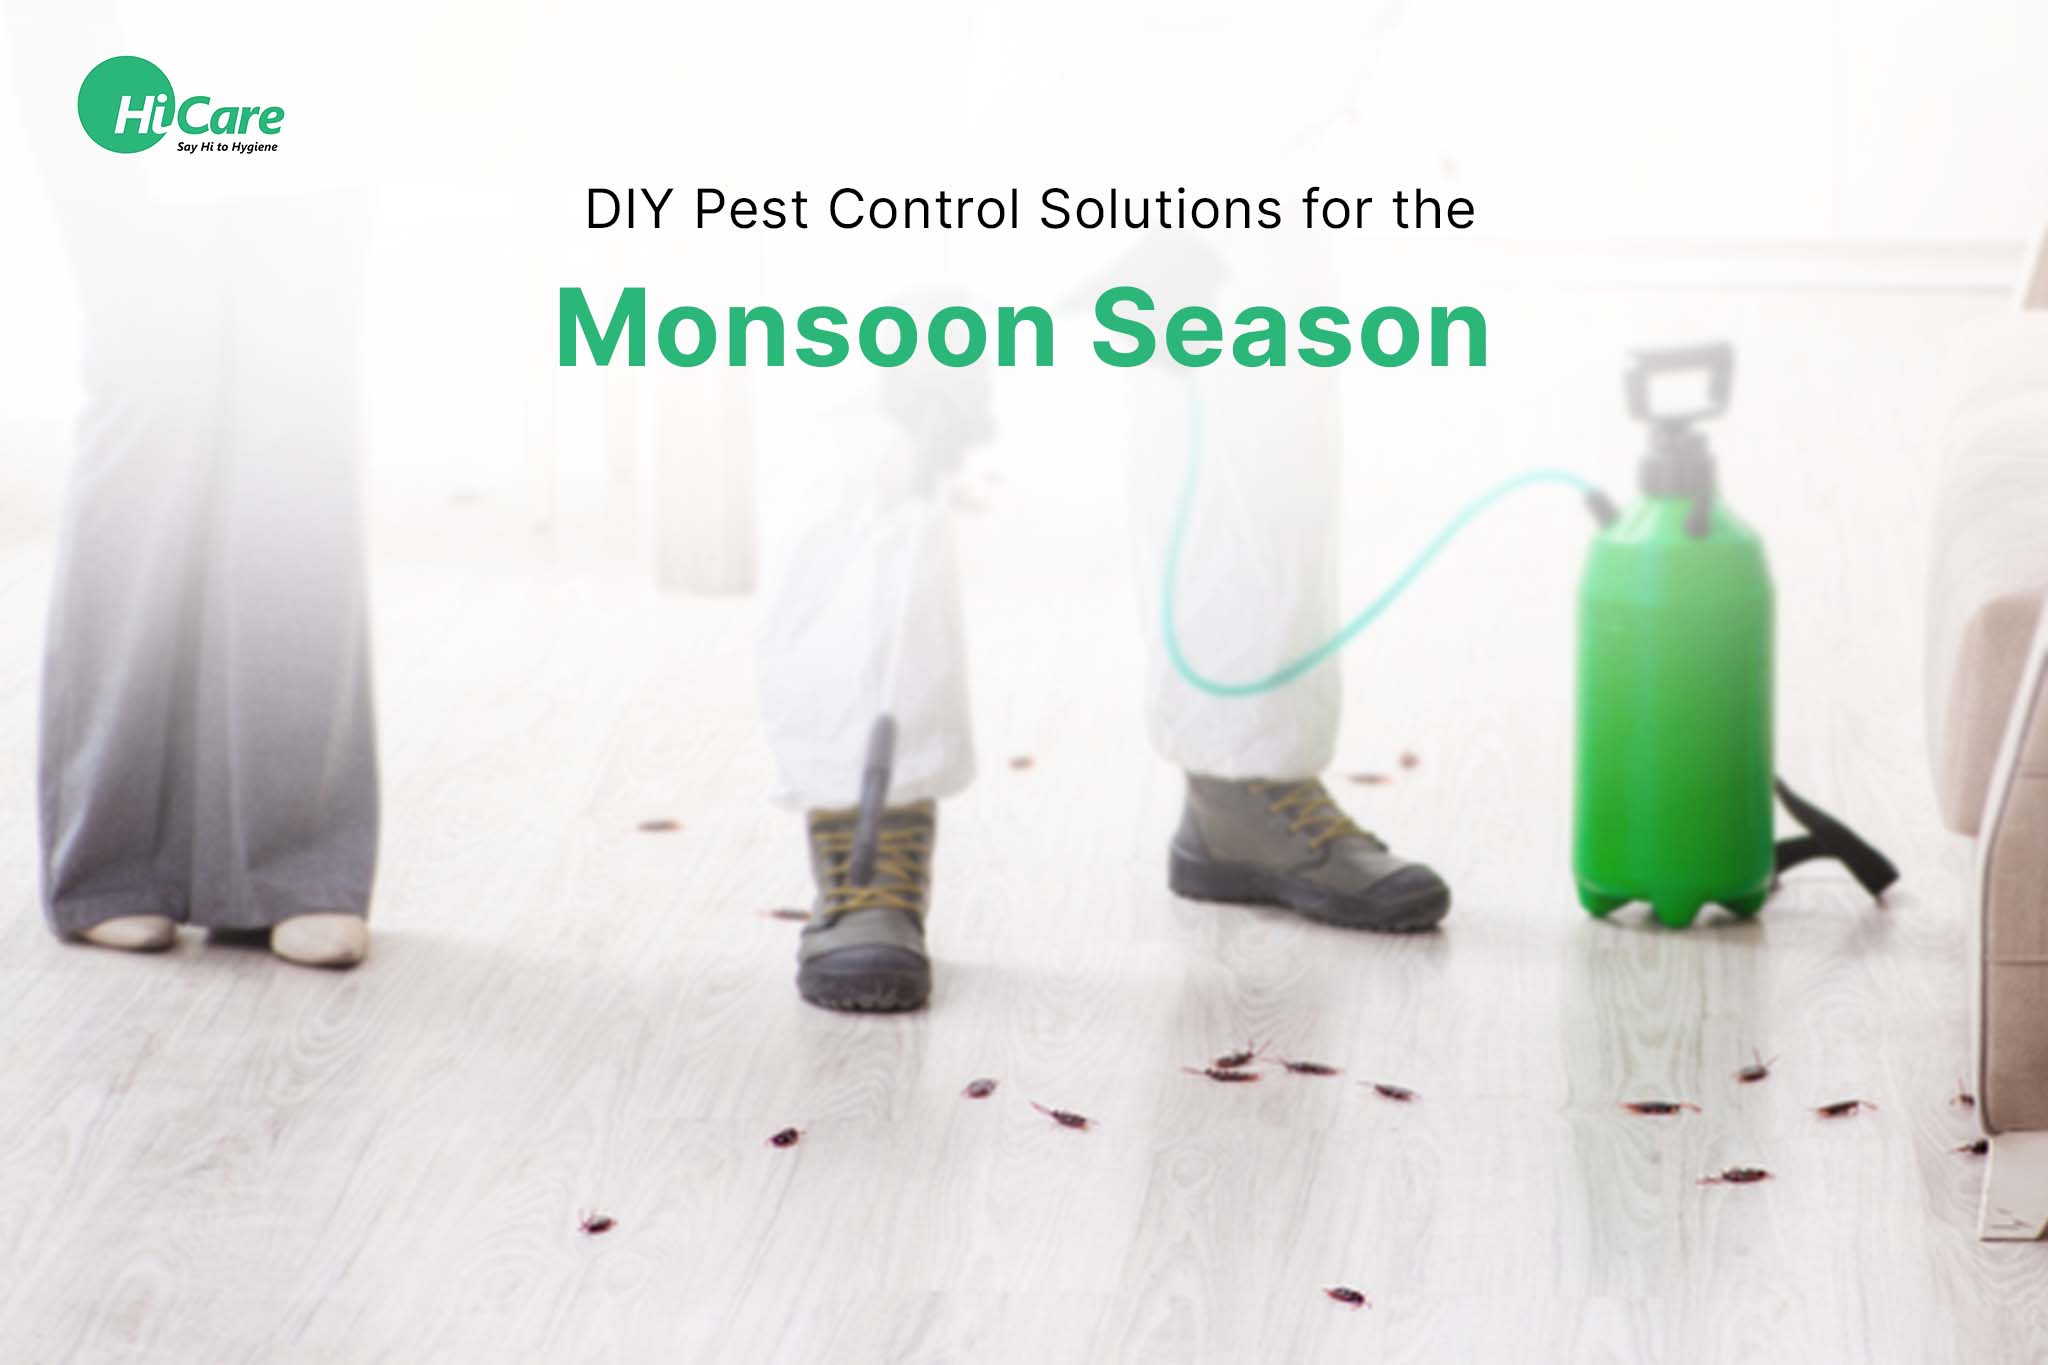 DIY Pest Control Solutions for the Monsoon Season